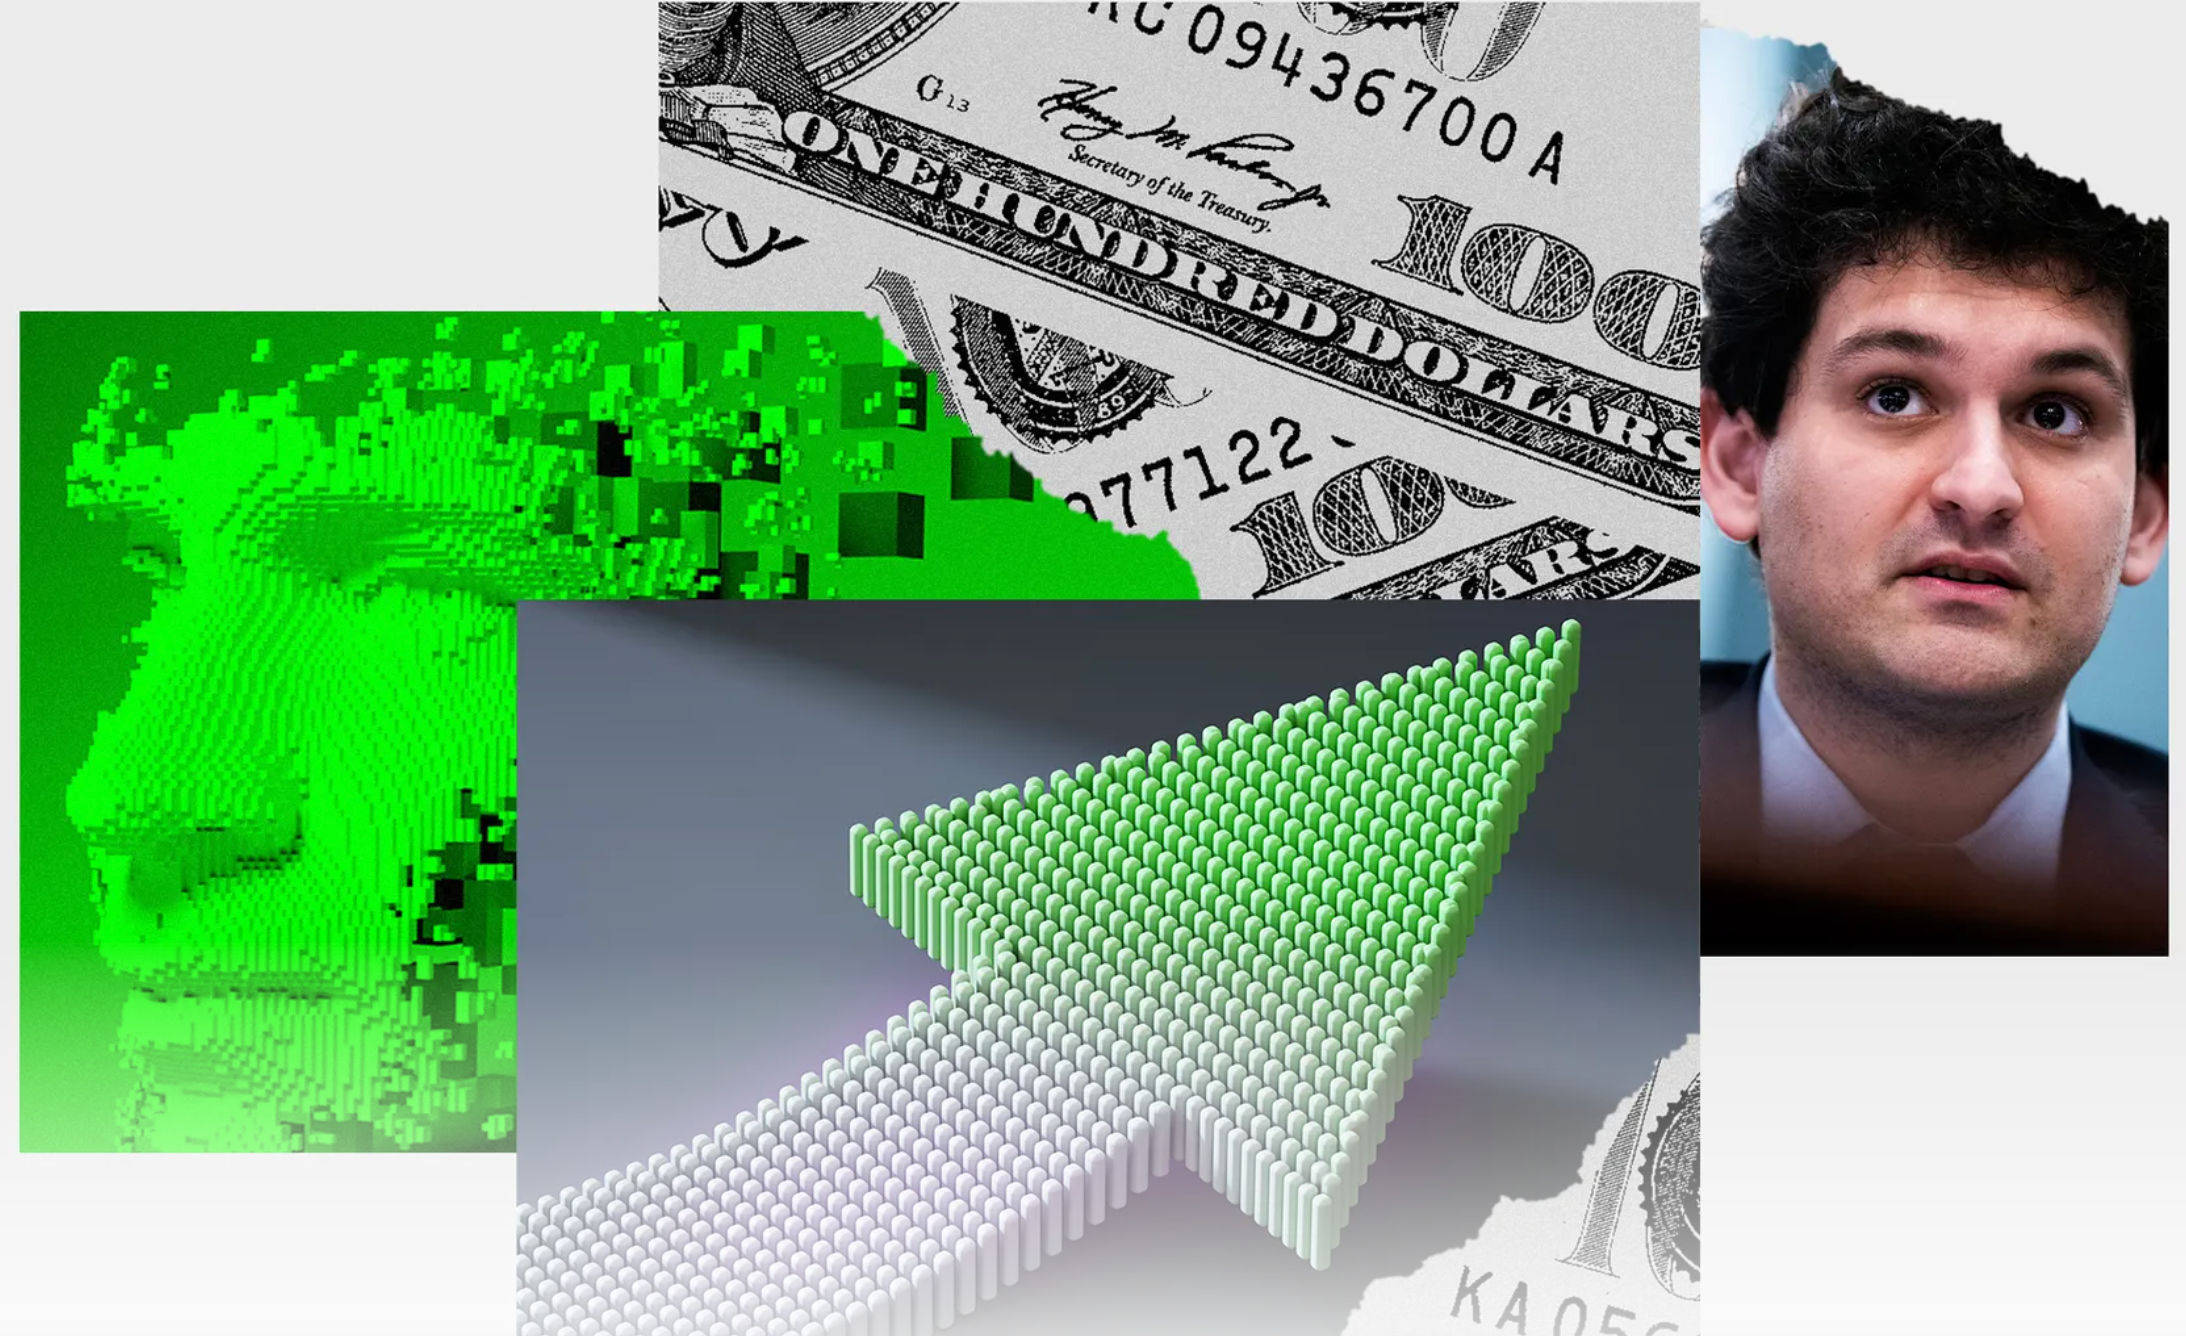 Image is composed of four pictures arranged like a plus sign. Left: a digital illustration of a green, pixellated human face that disintegrates into tiny pieces around the edges. At the top, a photo of two hundred-dollar bills arranged on top of each other. On the bottom, digital illustration of an arrow pointing up and to the right -- the arrow transitions from gray to green from end to tip, and appears to be next to a torn piece of US paper currency. On the right, a photo of Sam Bankman-Fried, a white man with dark, curly hair. The color and jacket of a suit are visible, and he is looking upward.